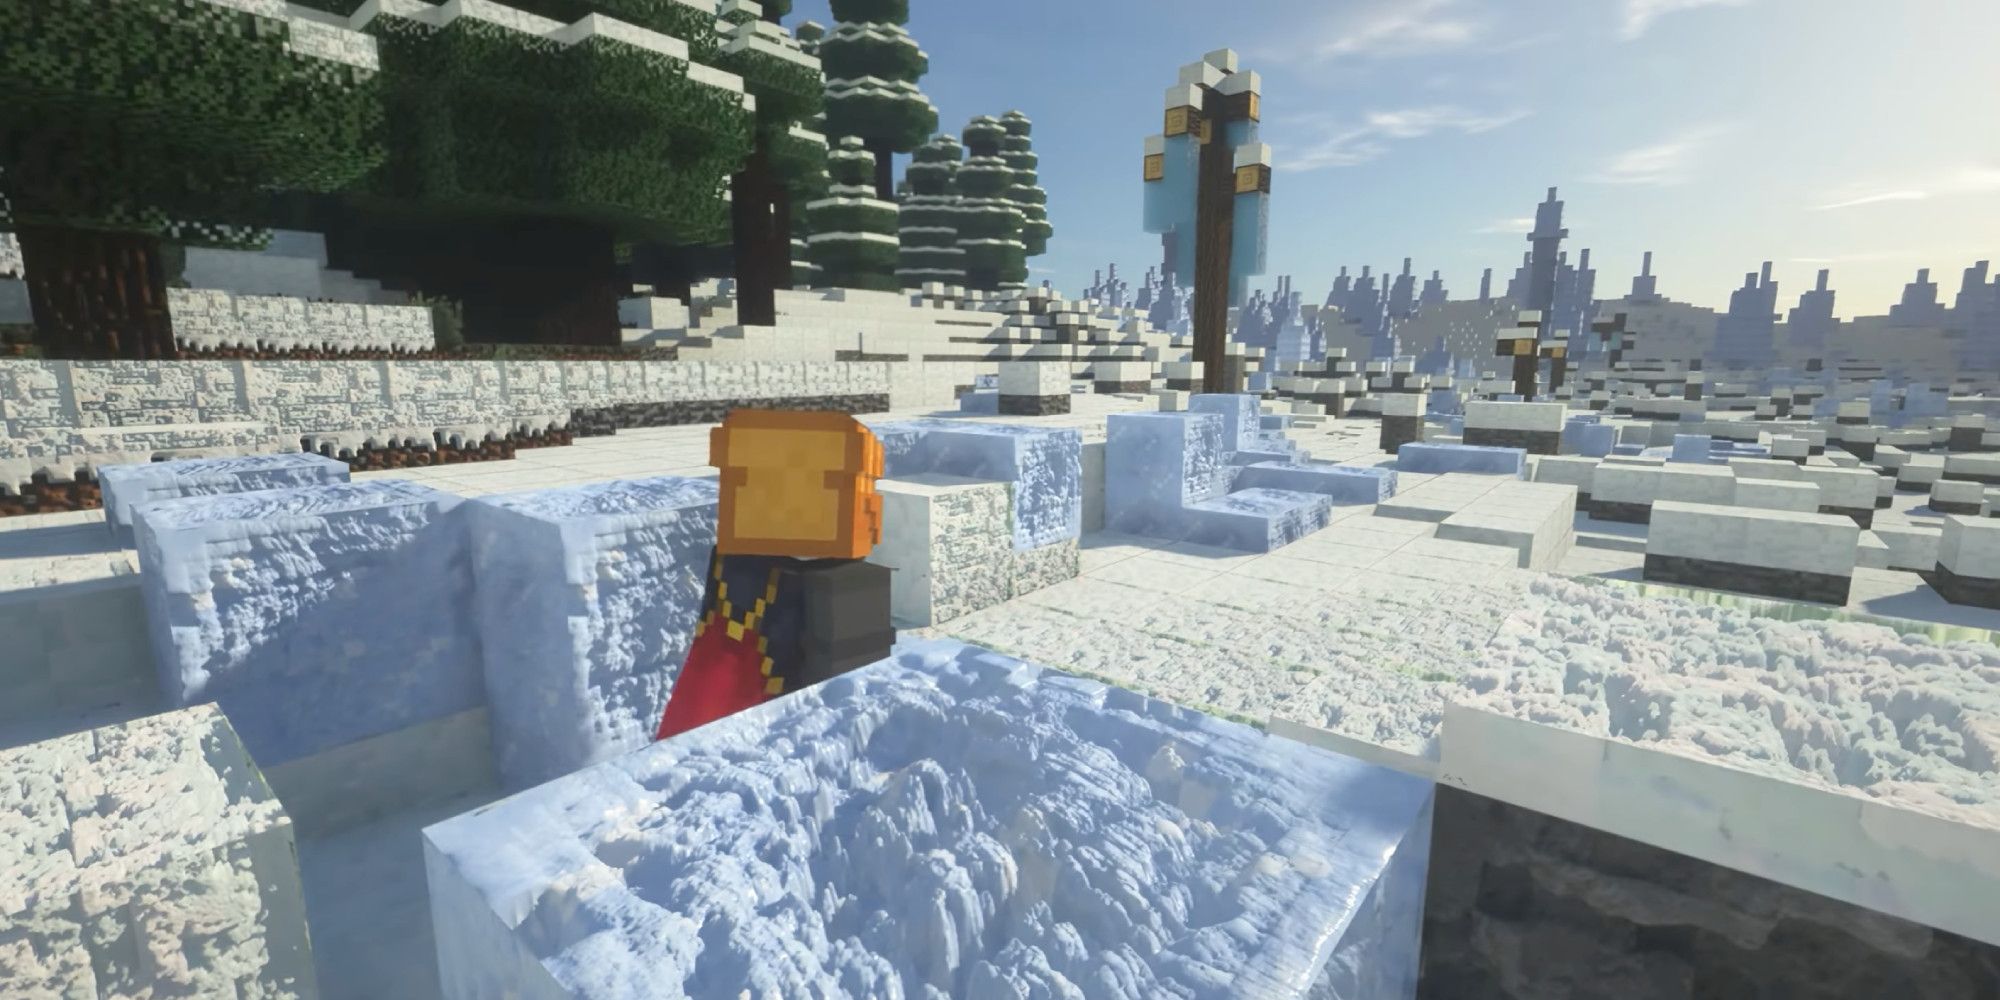 A snowy scene in Minecraft using the Realistico resource pack